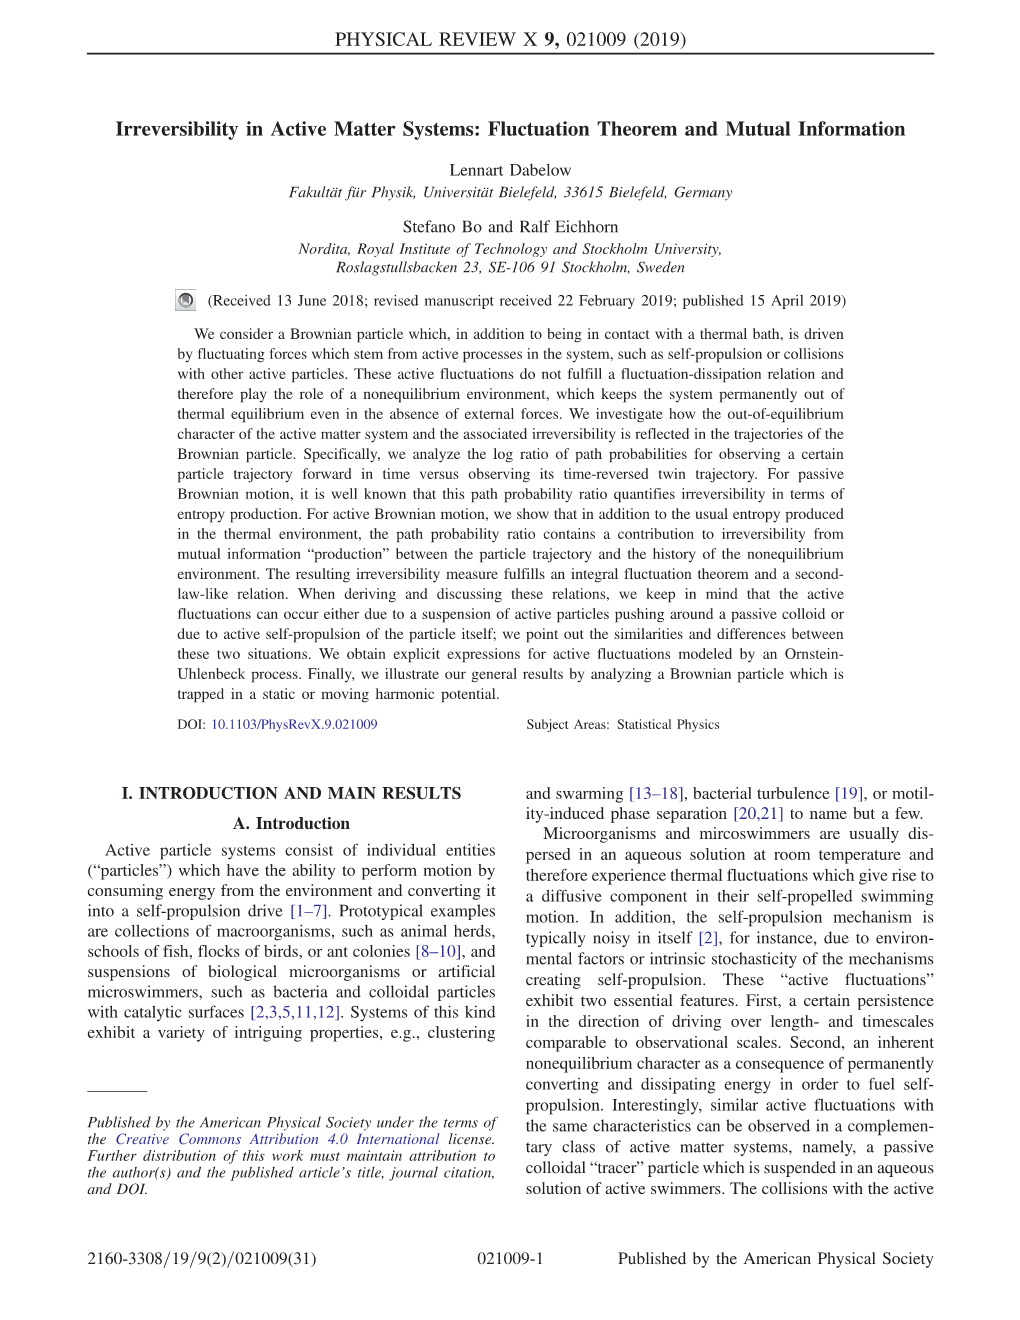 Irreversibility in Active Matter Systems: Fluctuation Theorem and Mutual Information